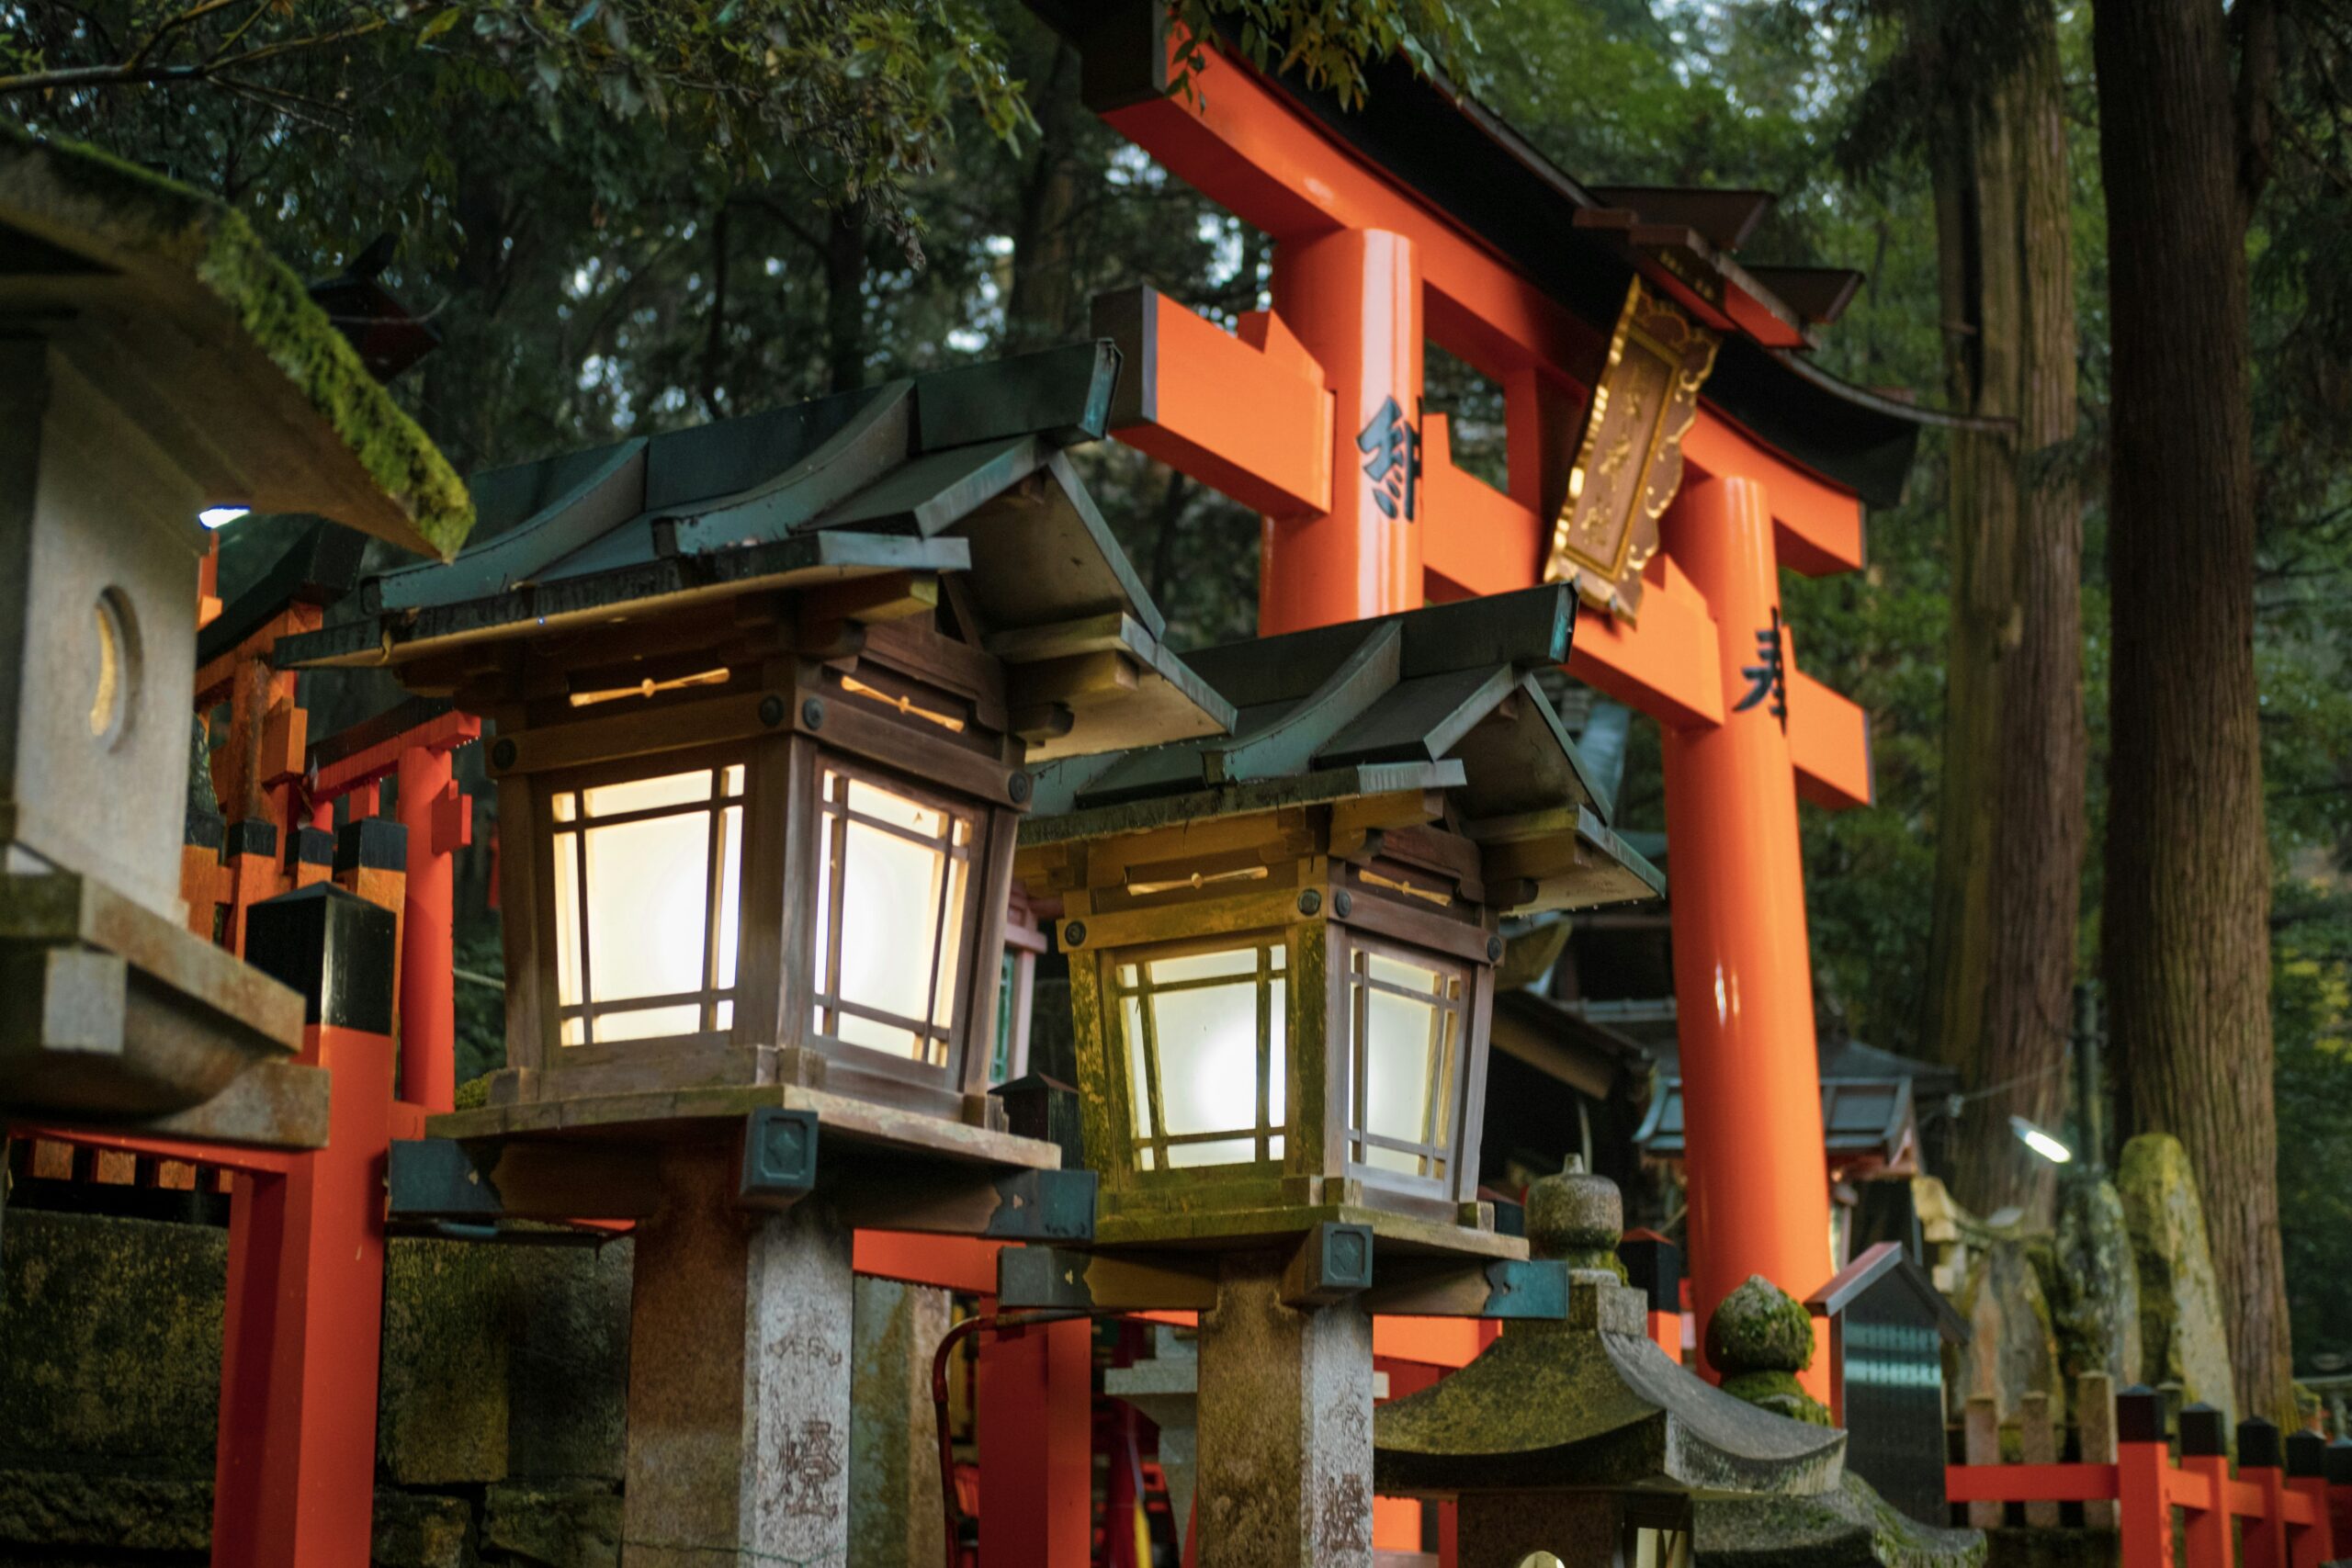 Kyoto is a popular place for tourists visiting Japan in spring.
pictured: a traditional building and lantern in Kyoto, Japan